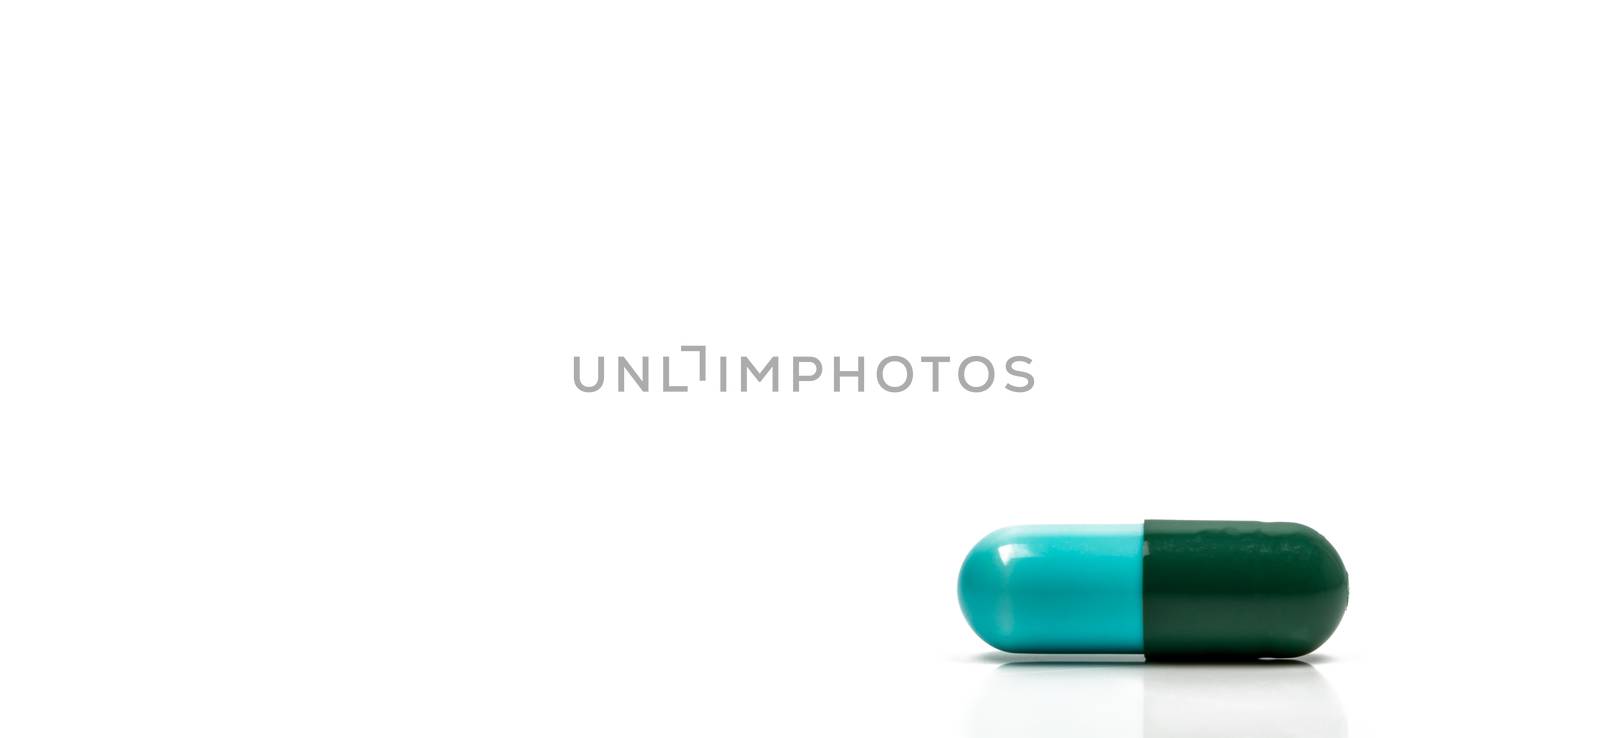 Blue, green antibiotics capsule pill isolated on white background with copy space. Drug resistance concept. Antibiotics drug use with reasonable and global healthcare concept. Pharmaceutical industry. Pharmacy background. by Fahroni